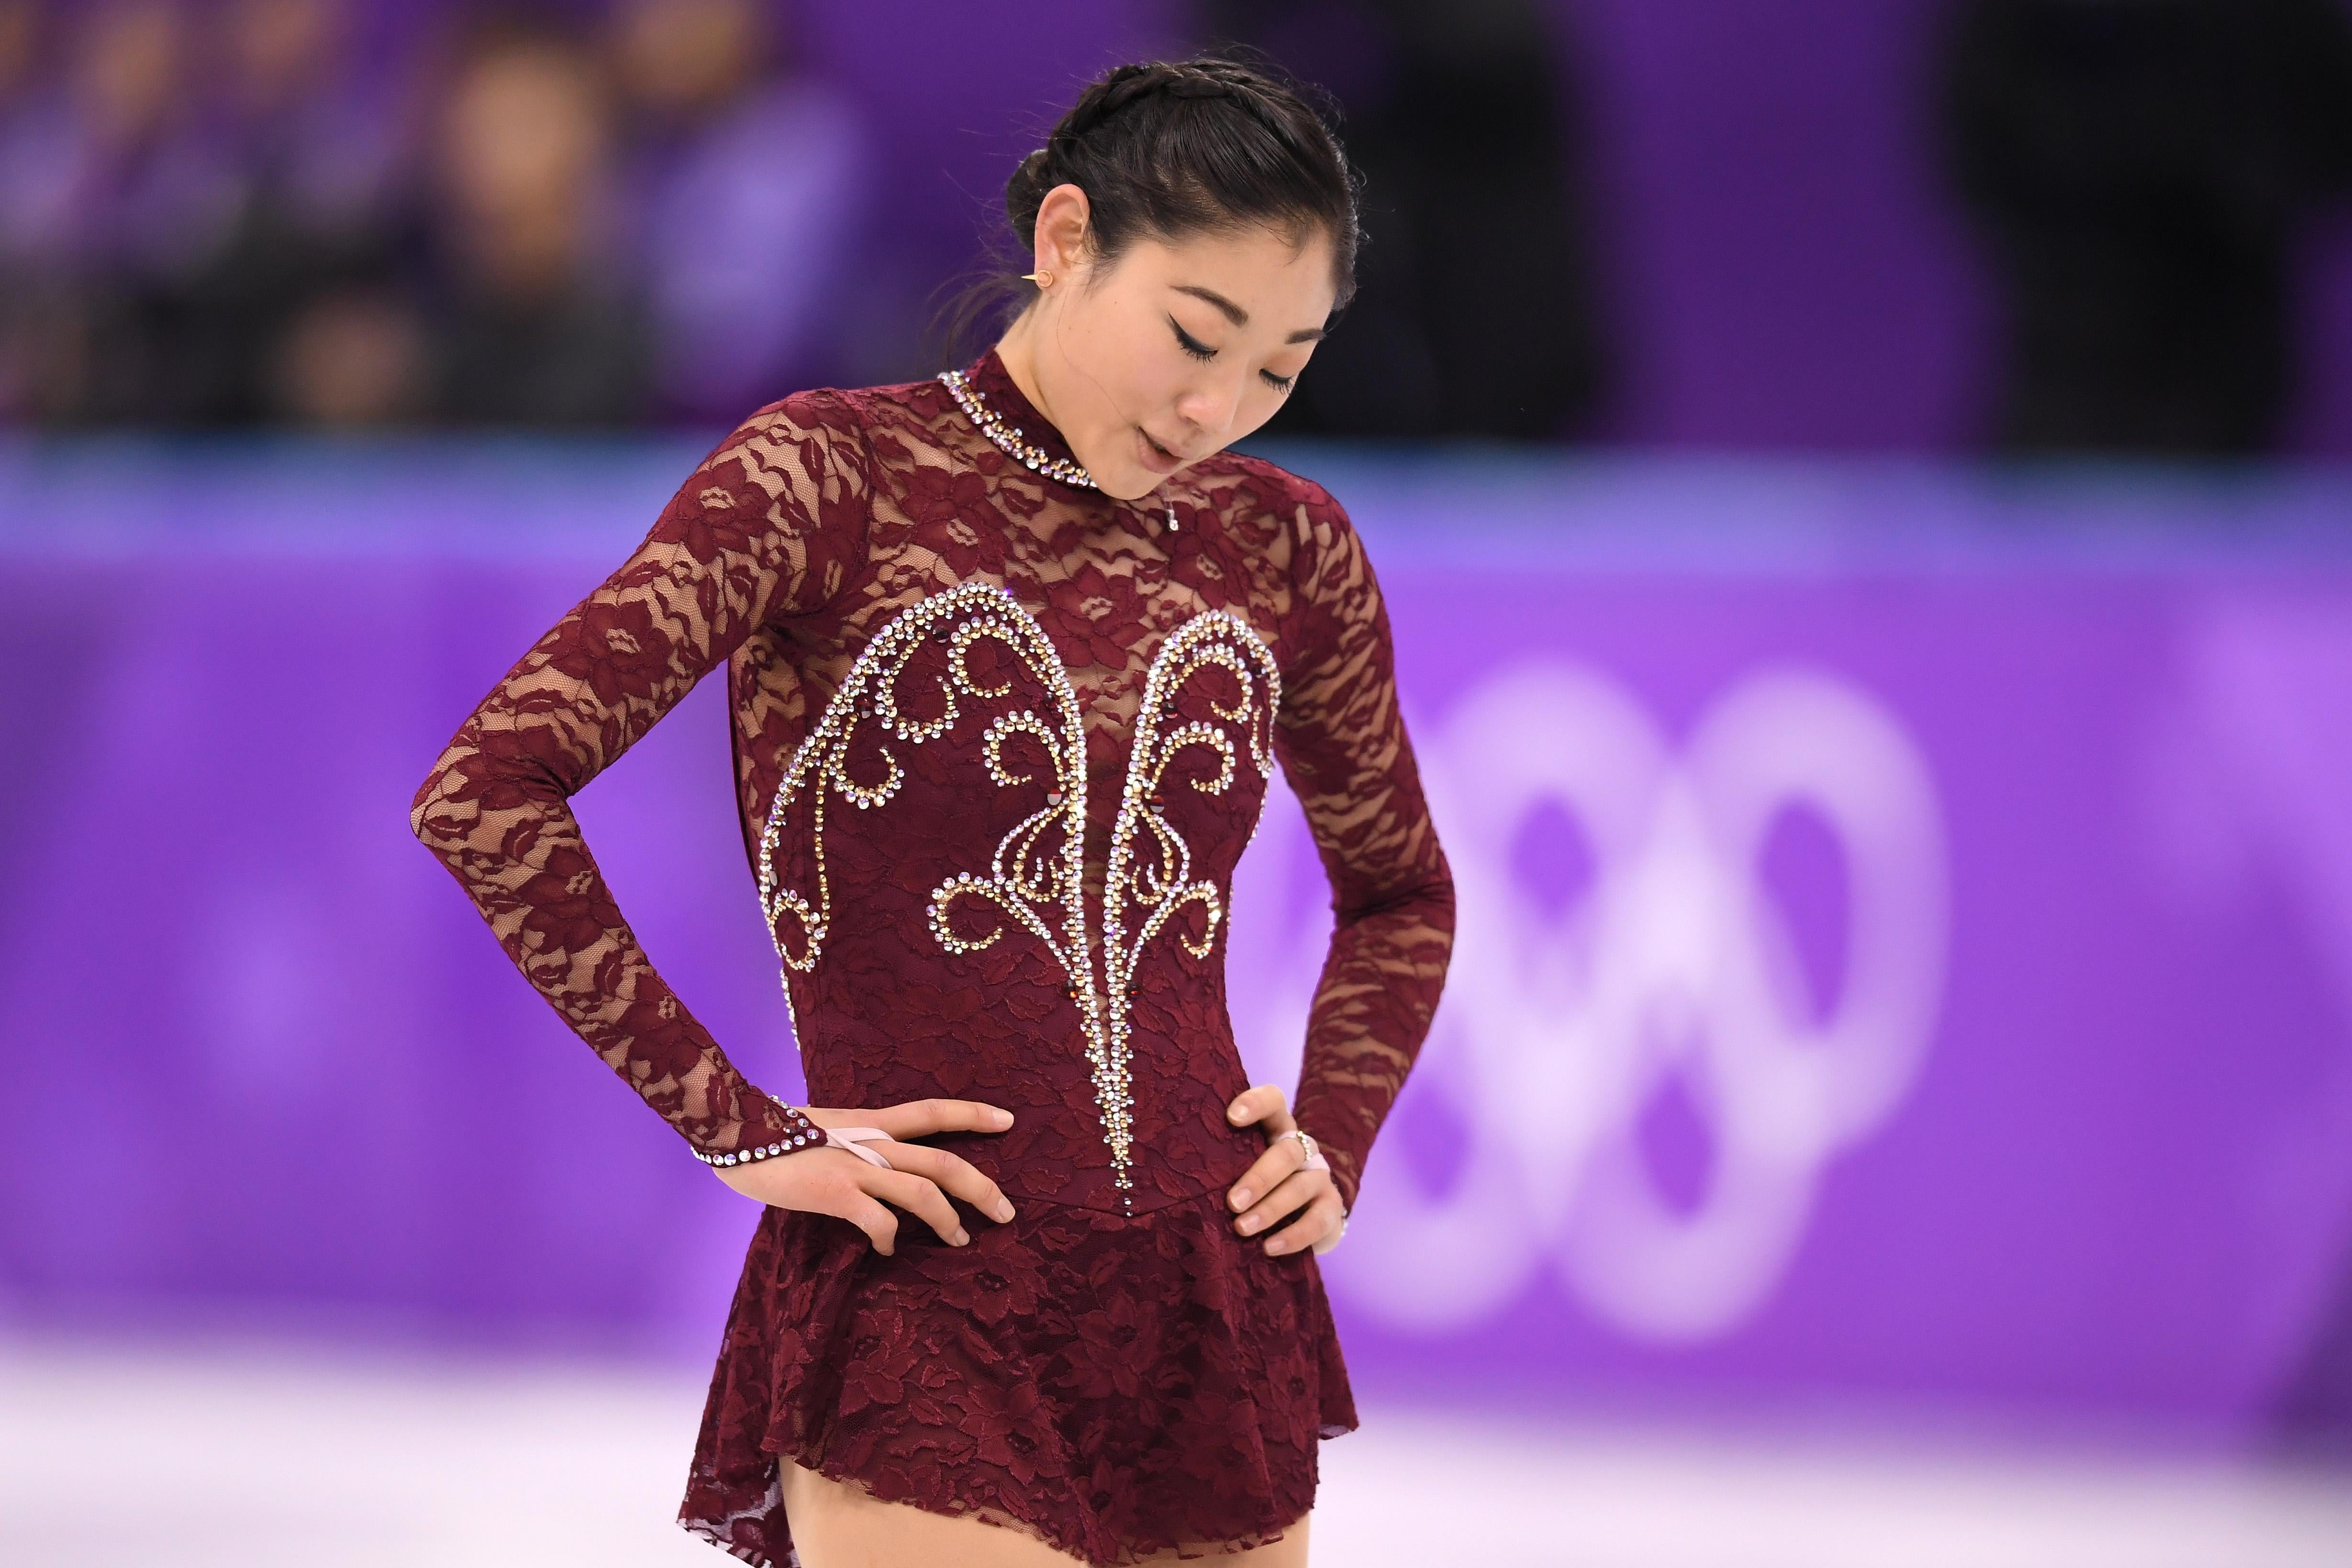 GANGNEUNG, SOUTH KOREA - FEBRUARY 21:  Mirai Nagasu of the United States competes during the Ladies Single Skating Short Program on day twelve of the PyeongChang 2018 Winter Olympic Games at Gangneung Ice Arena on February 21, 2018 in Gangneung, South Korea.  (Photo by Harry How/Getty Images)